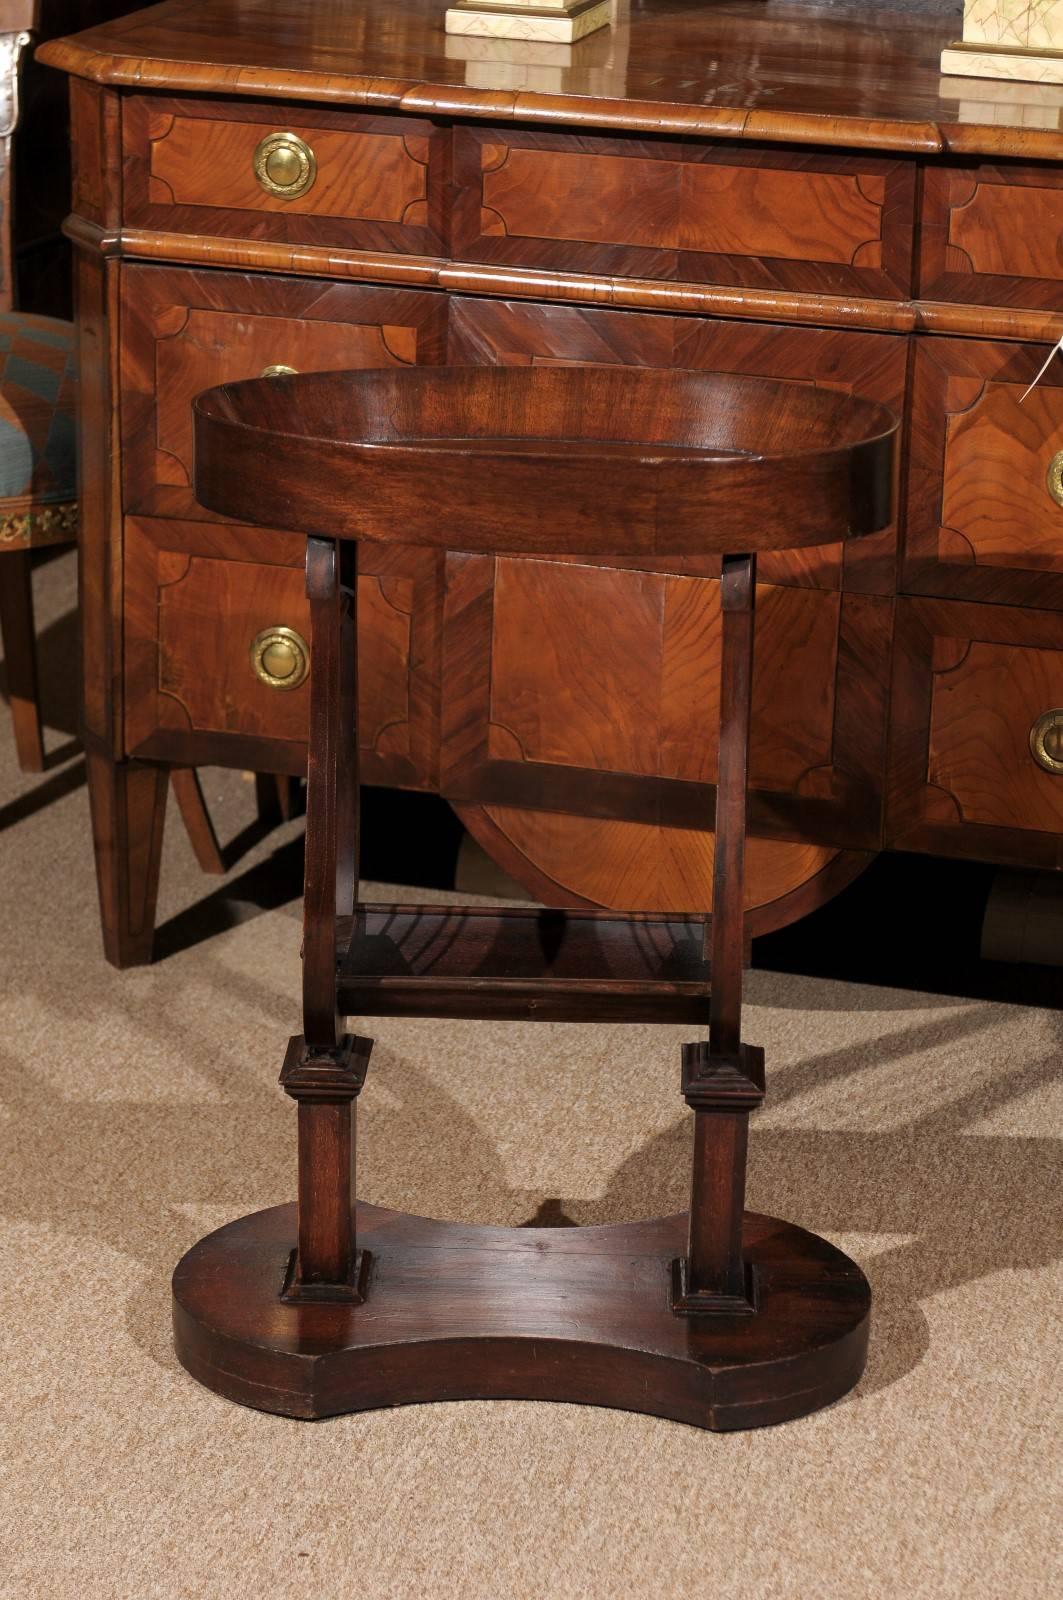 Empire style side table in mahogany with oval shaped dish top and lyre base with brass "Strings", France, circa 1890. Medium mahogany finish. Excellent antique condition.